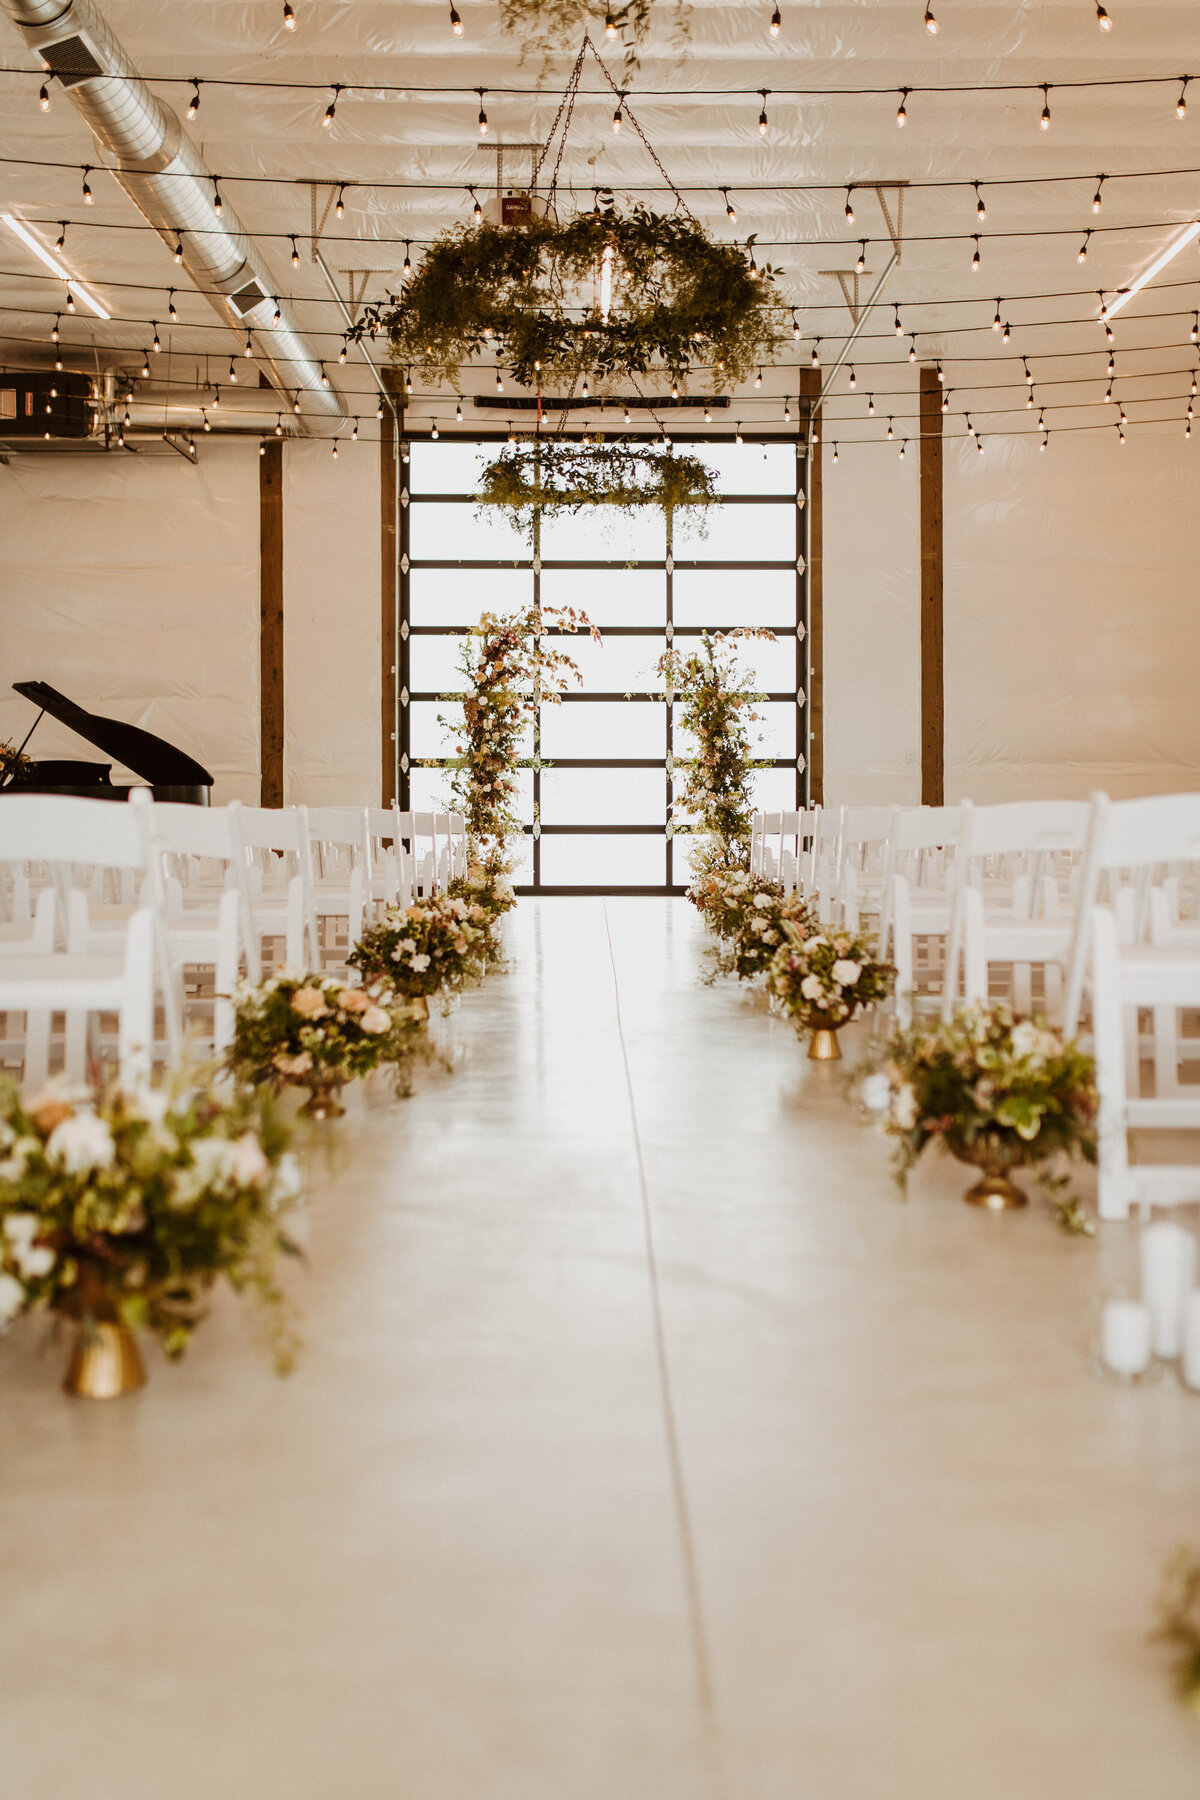 Shot of interior White Barn with rows of white chairs, flower placements at each row and a shot of the altar,  the big glass door framed with greenery and flowers.